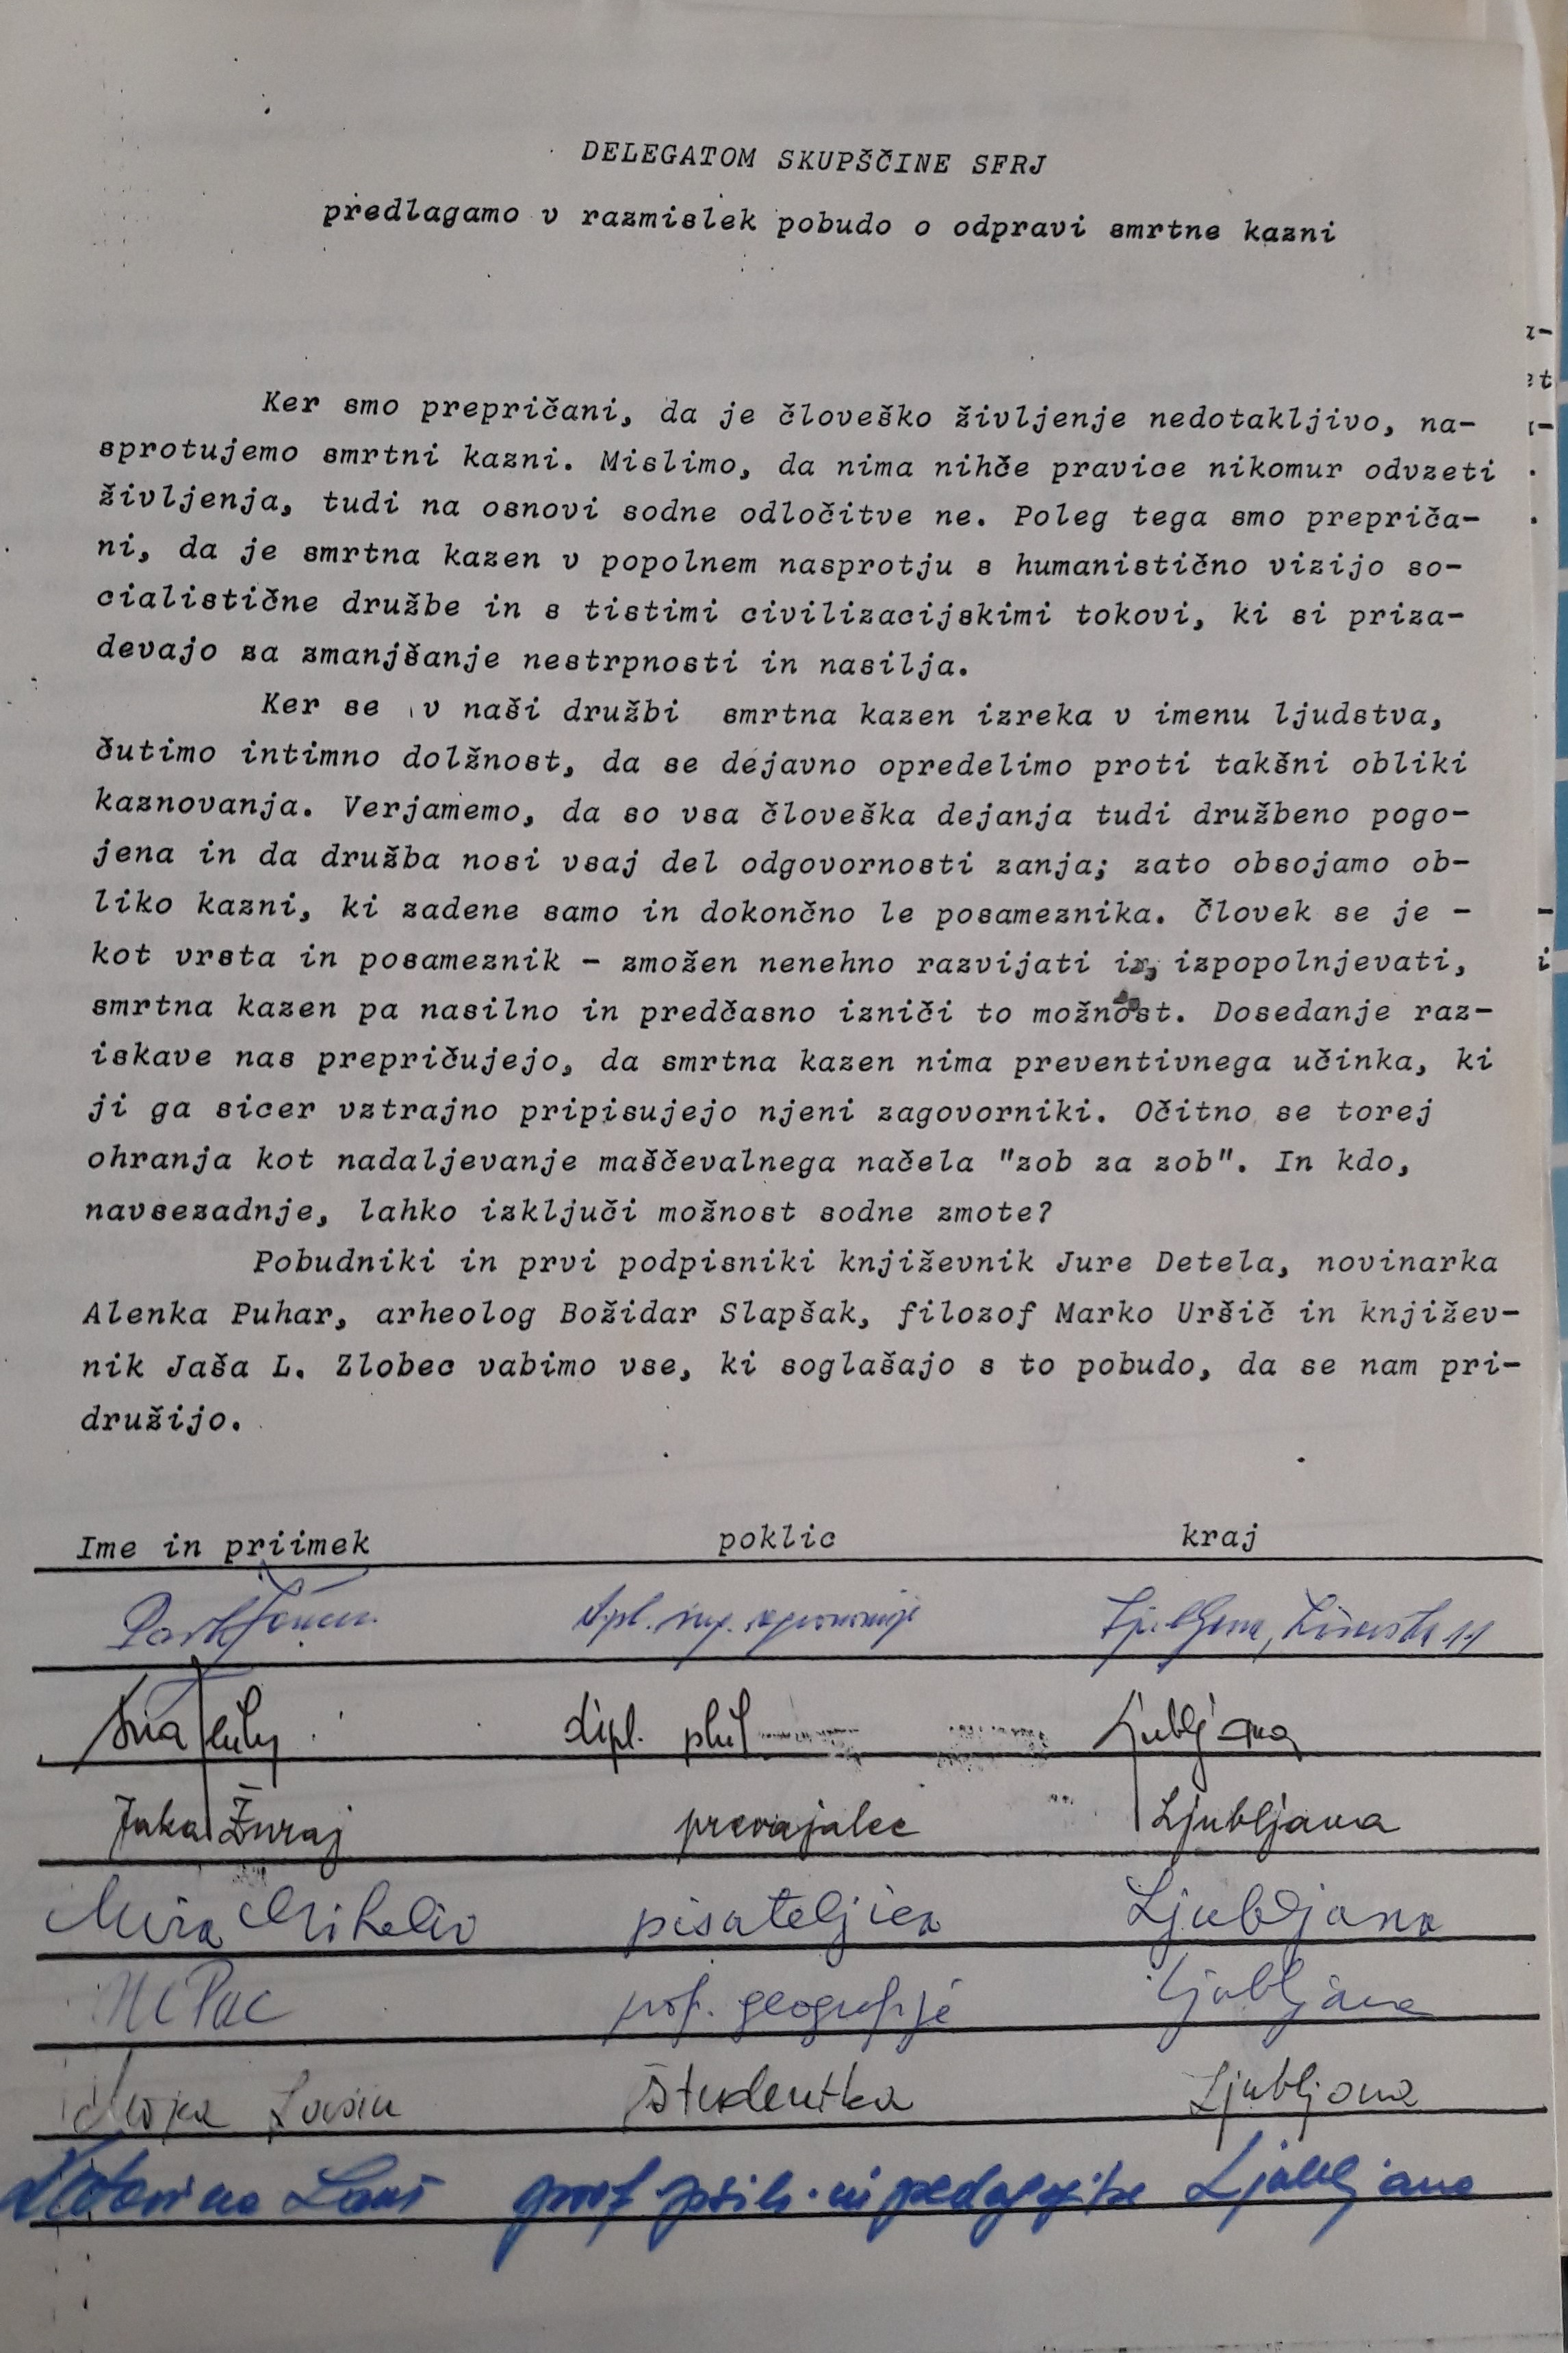 Petition for the abolition of the death penalty in Yugoslavia, 1983. Manuscript